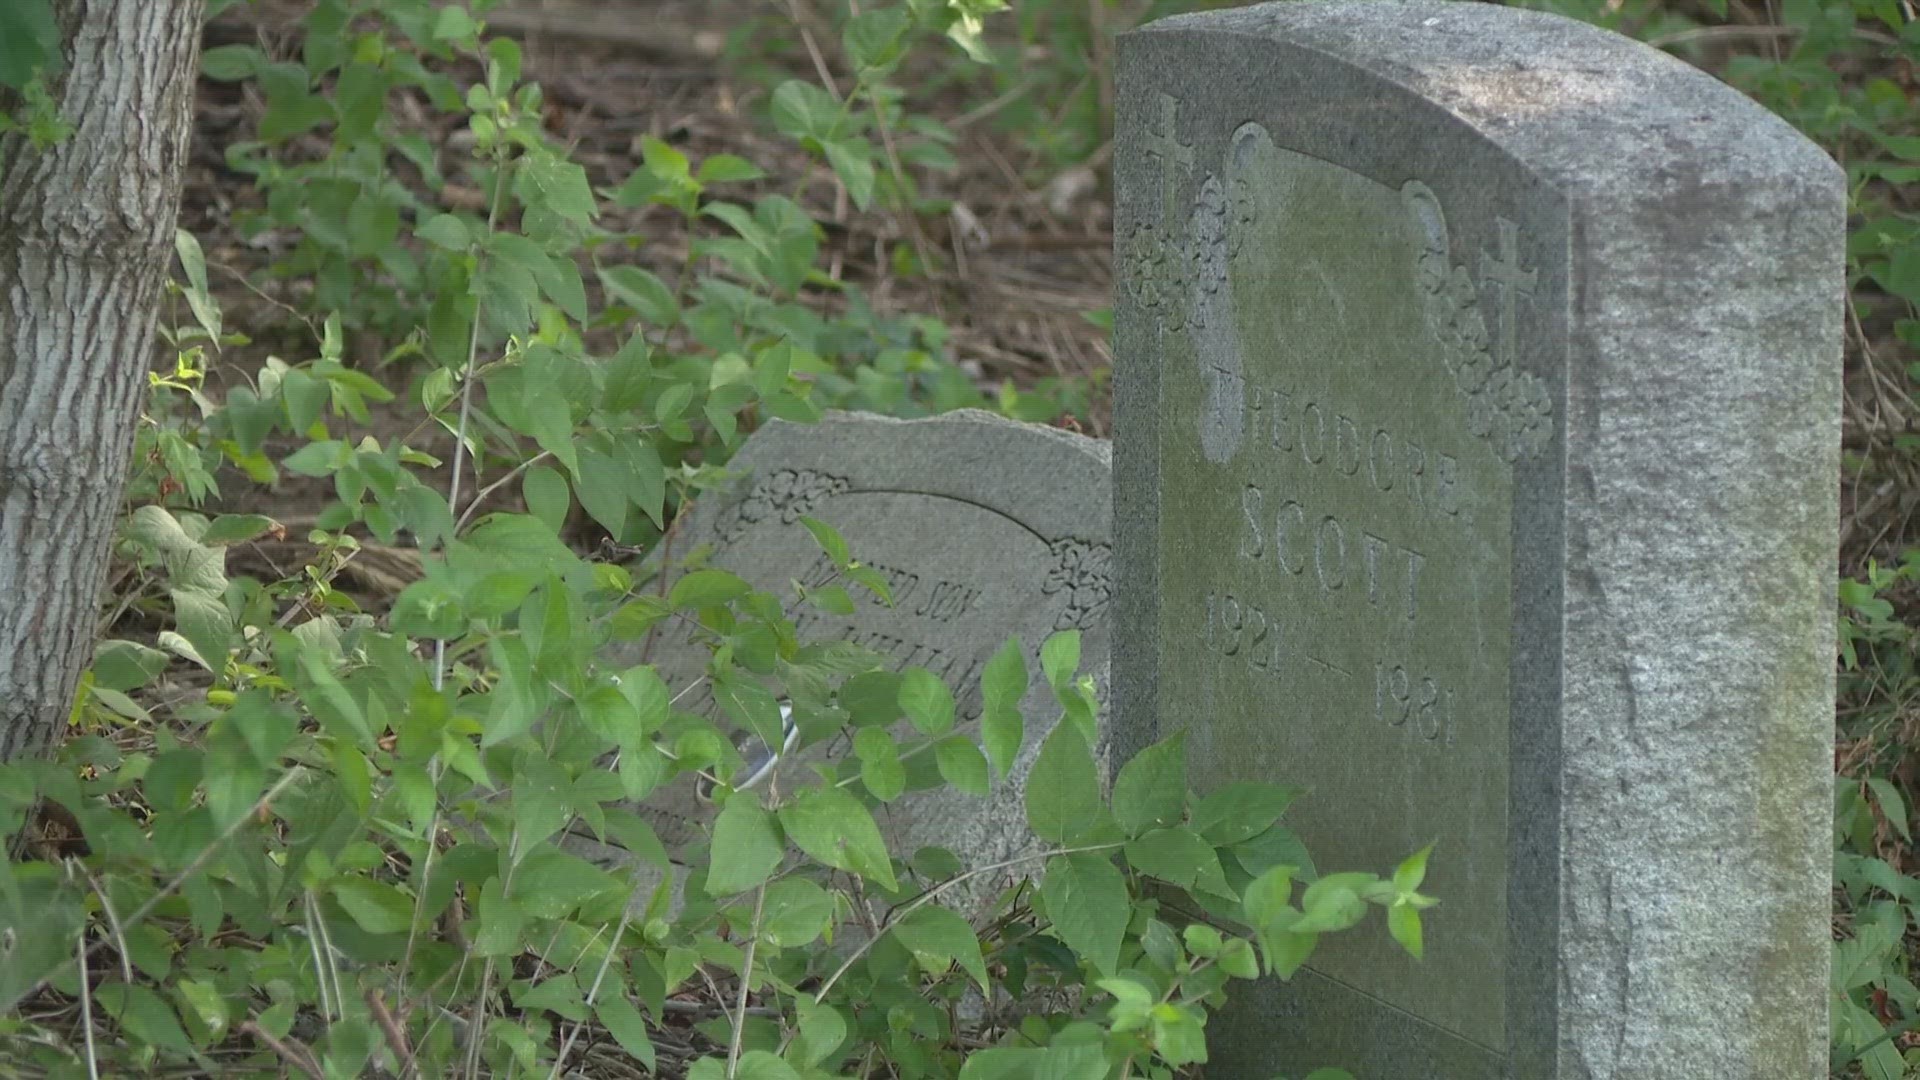 It's very frustrating and it hurts. I just wan to find my grandmother's headstone," Sharon Webb said.